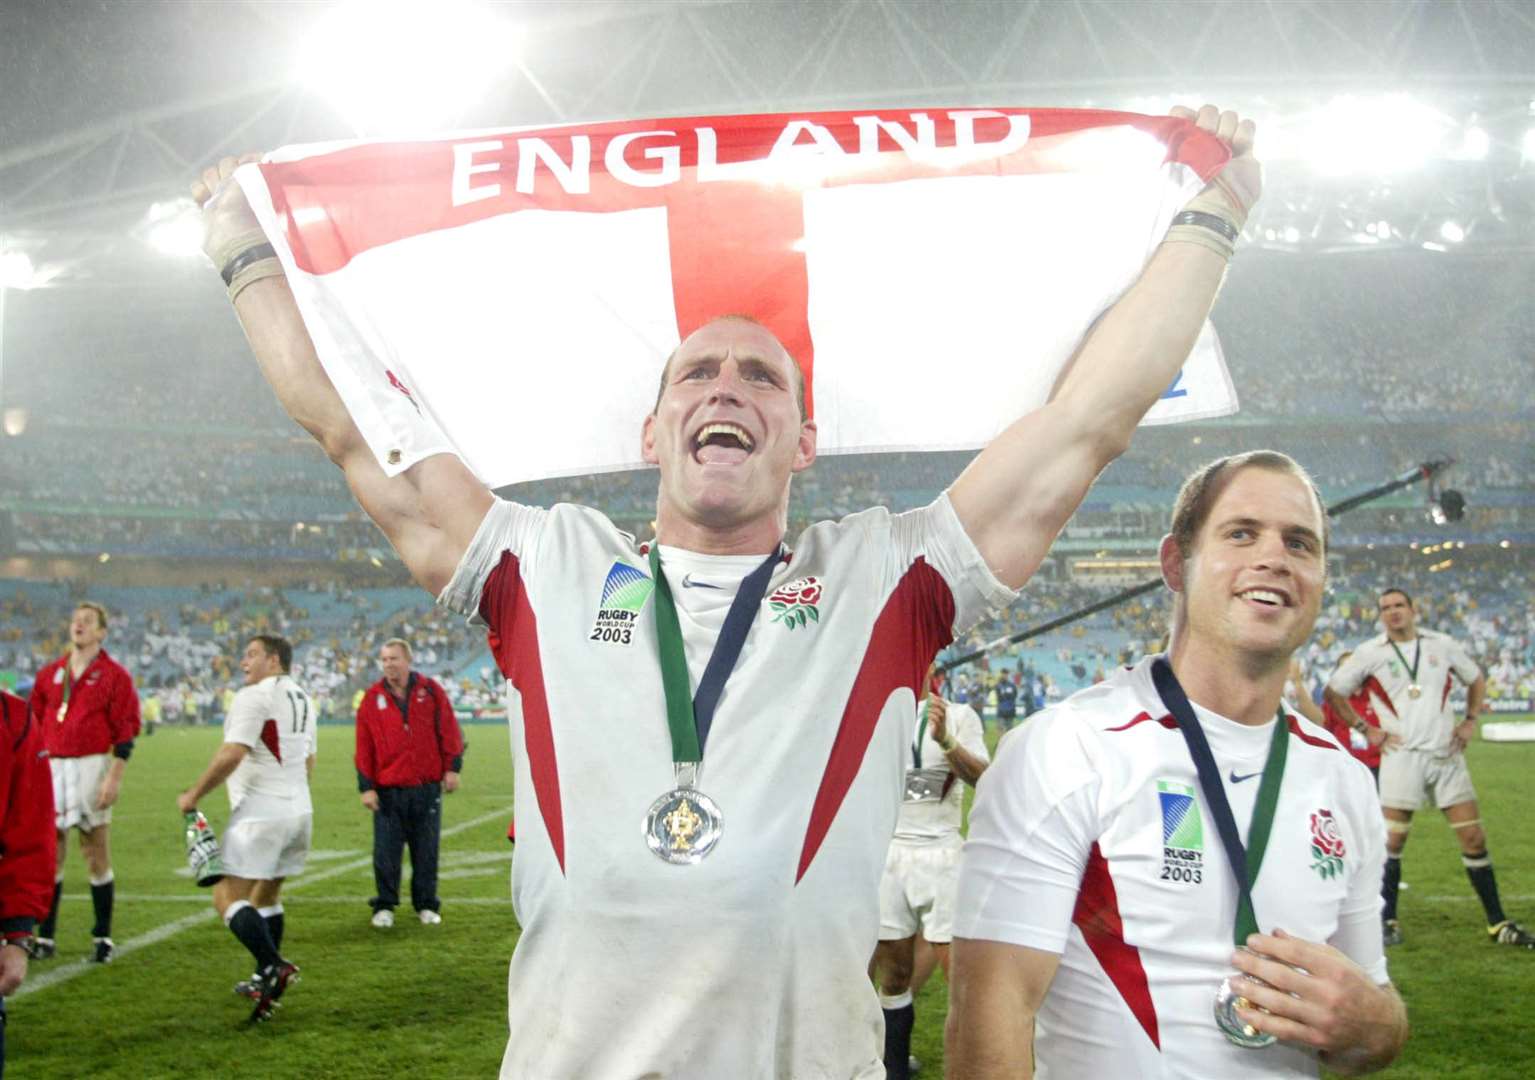 Lawrence Dallaglio, left, and Kyran Bracken celebrate after England’s World Cup win in 2003 (David Davies/PA)